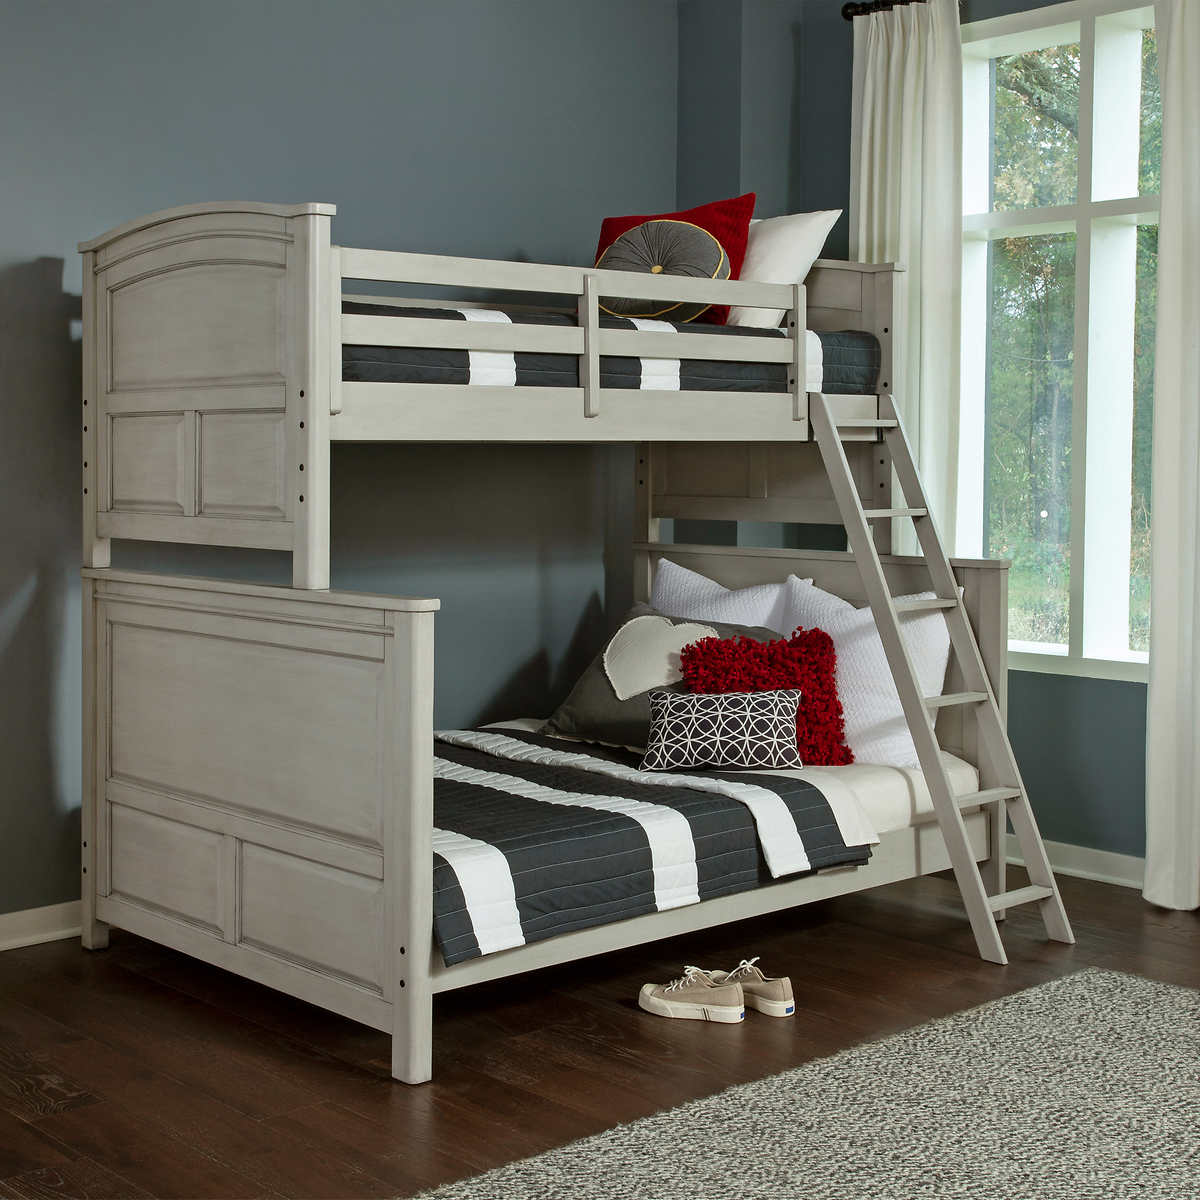 Wingate Twin Over Double Bunk Costco, Girls Bunk Beds Twin Over Full